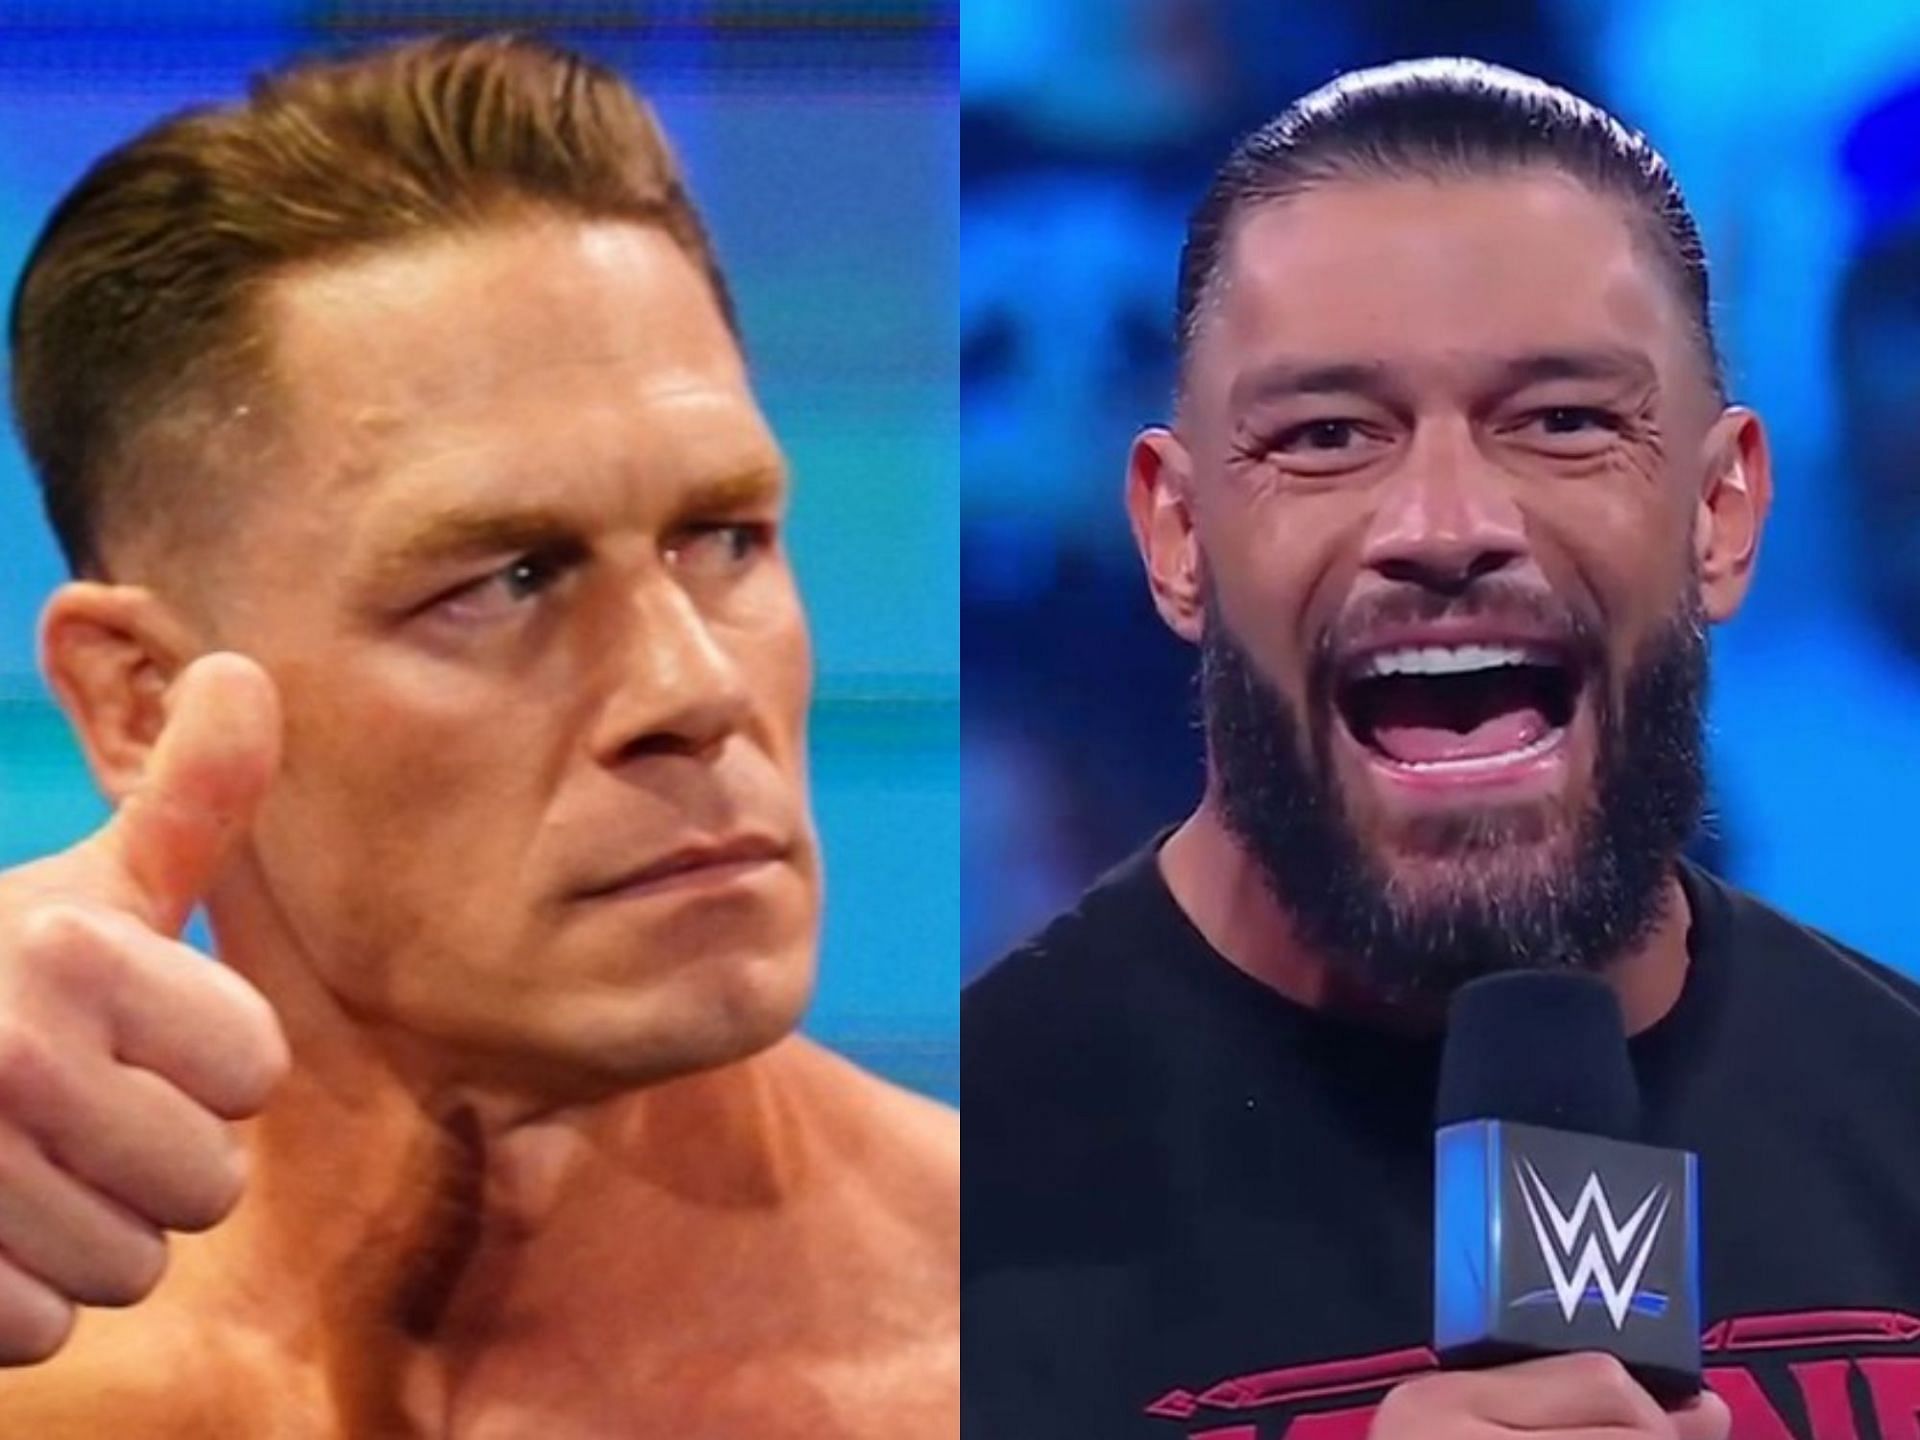 John Cena revealed one thing about the current WWE generation that gets him a little frustrated